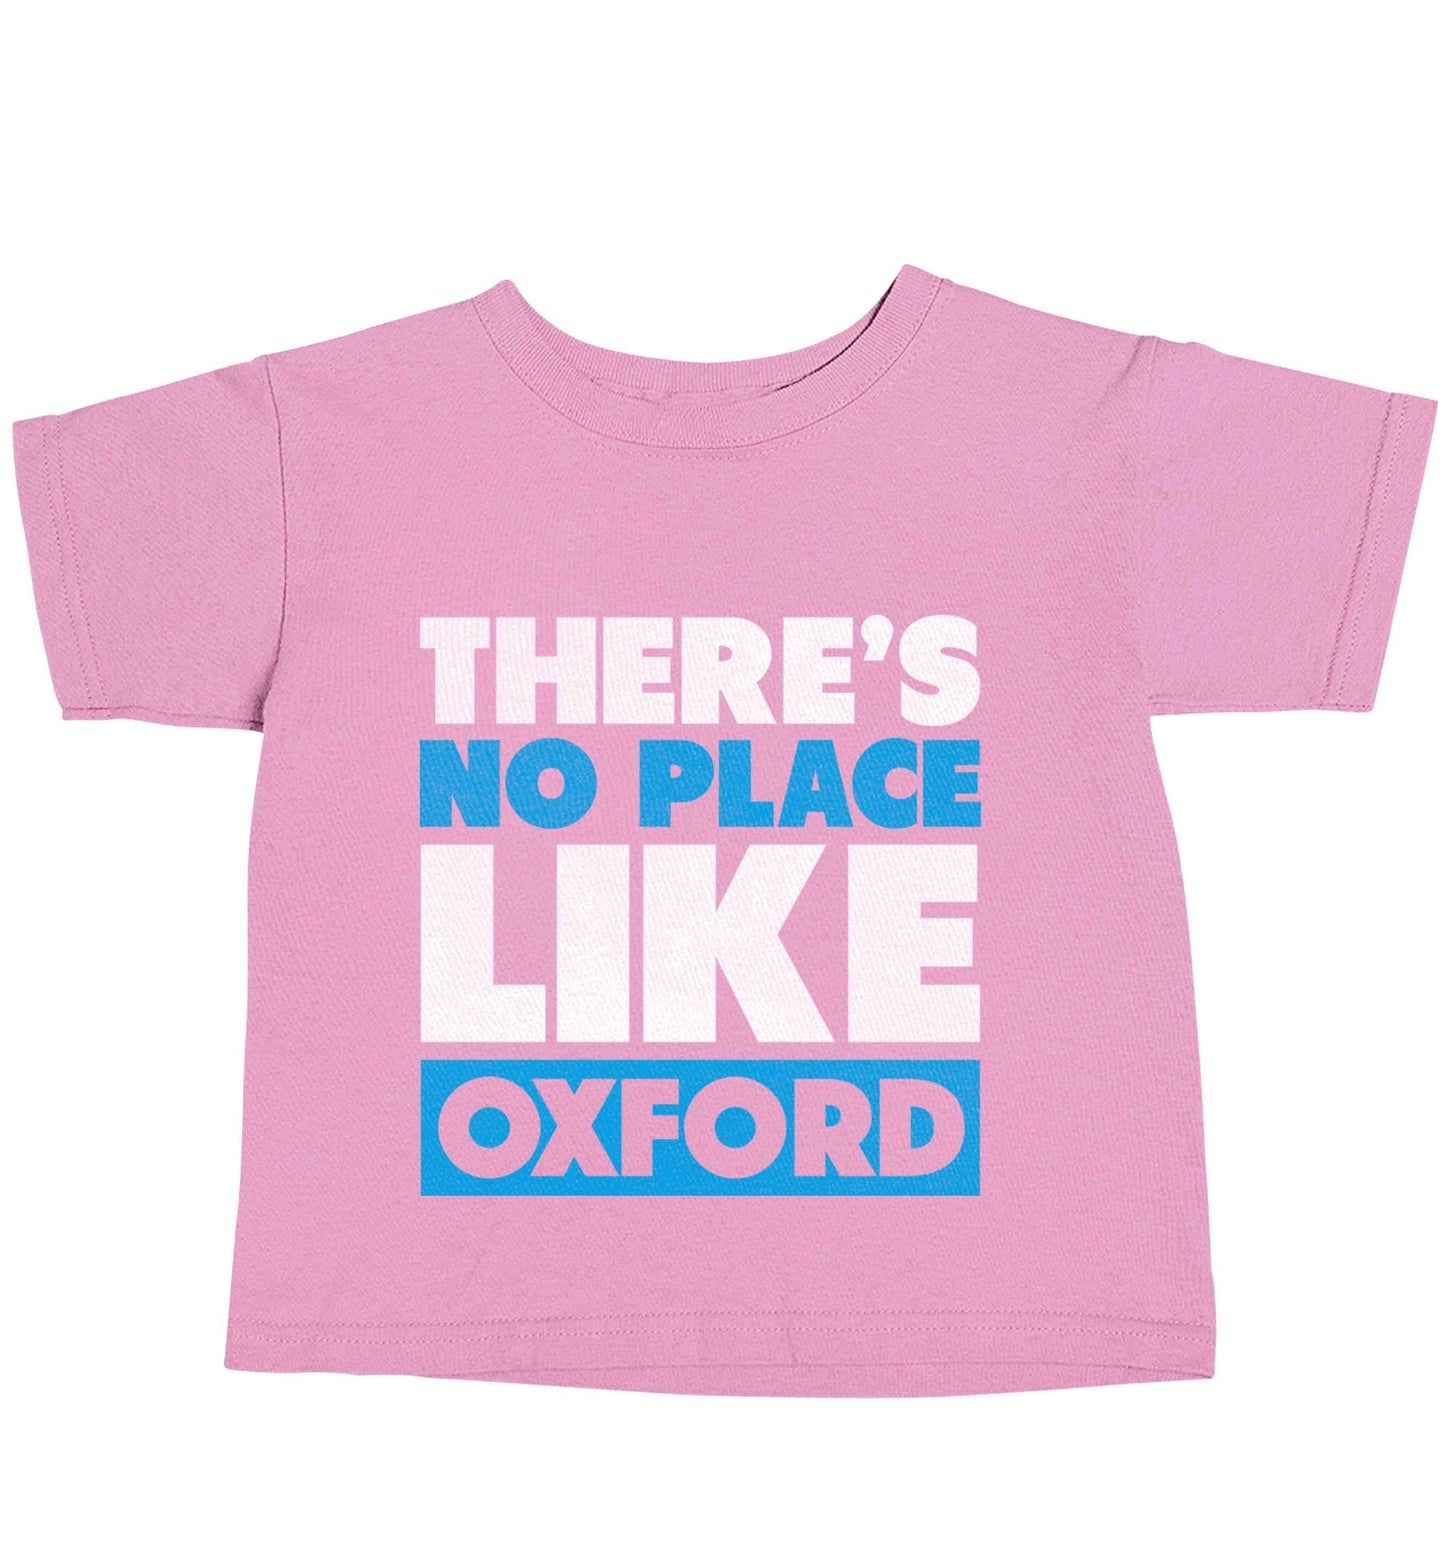 There's no place like Oxford light pink baby toddler Tshirt 2 Years